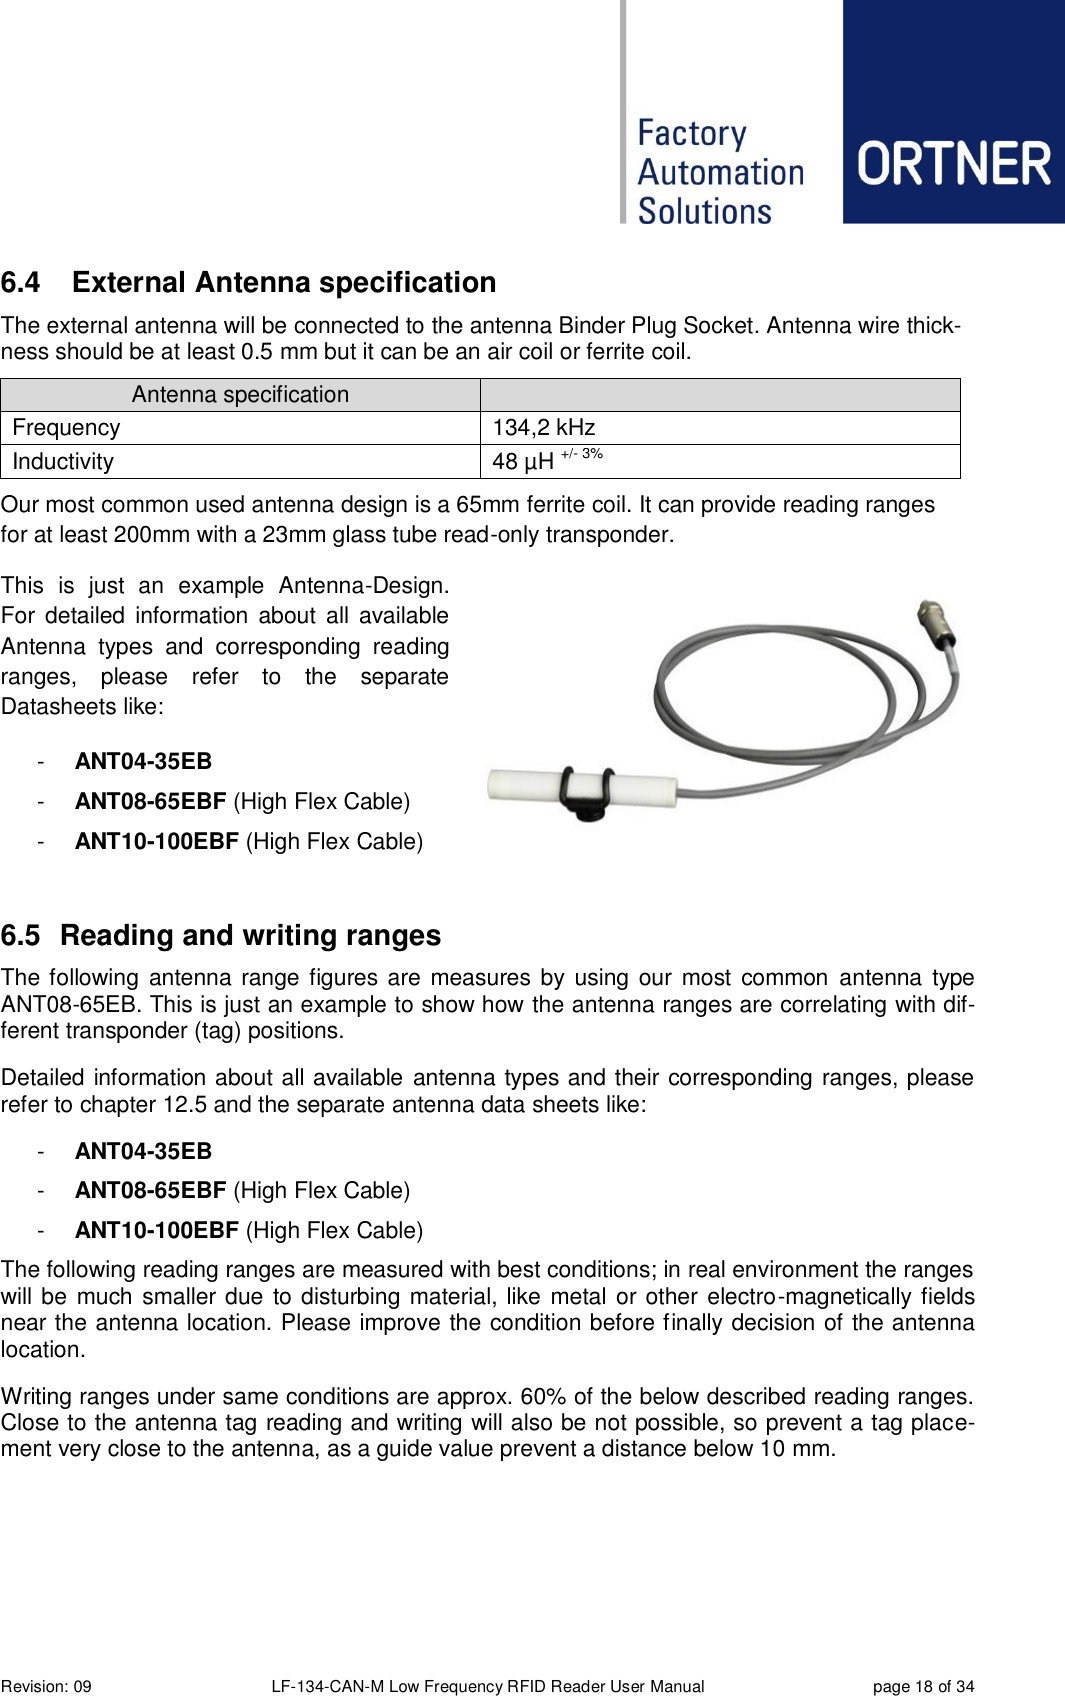  Revision: 09 LF-134-CAN-M Low Frequency RFID Reader User Manual  page 18 of 34 6.4  External Antenna specification The external antenna will be connected to the antenna Binder Plug Socket. Antenna wire thick-ness should be at least 0.5 mm but it can be an air coil or ferrite coil.  Antenna specification  Frequency 134,2 kHz Inductivity 48 µH +/- 3% Our most common used antenna design is a 65mm ferrite coil. It can provide reading ranges   for at least 200mm with a 23mm glass tube read-only transponder. This  is  just  an  example  Antenna-Design. For  detailed  information  about  all  available Antenna  types  and  corresponding  reading ranges,  please  refer  to  the  separate Datasheets like: -  ANT04-35EB -  ANT08-65EBF (High Flex Cable) -  ANT10-100EBF (High Flex Cable)  6.5  Reading and writing ranges The following  antenna  range figures are measures by using our most common  antenna  type ANT08-65EB. This is just an example to show how the antenna ranges are correlating with dif-ferent transponder (tag) positions. Detailed information about all available antenna types and their corresponding ranges, please refer to chapter 12.5 and the separate antenna data sheets like: -  ANT04-35EB -  ANT08-65EBF (High Flex Cable) -  ANT10-100EBF (High Flex Cable) The following reading ranges are measured with best conditions; in real environment the ranges will be much smaller due to disturbing material, like metal or other electro-magnetically fields near the antenna location. Please improve the condition before finally decision of the antenna location. Writing ranges under same conditions are approx. 60% of the below described reading ranges. Close to the antenna tag reading and writing will also be not possible, so prevent a tag place-ment very close to the antenna, as a guide value prevent a distance below 10 mm.    